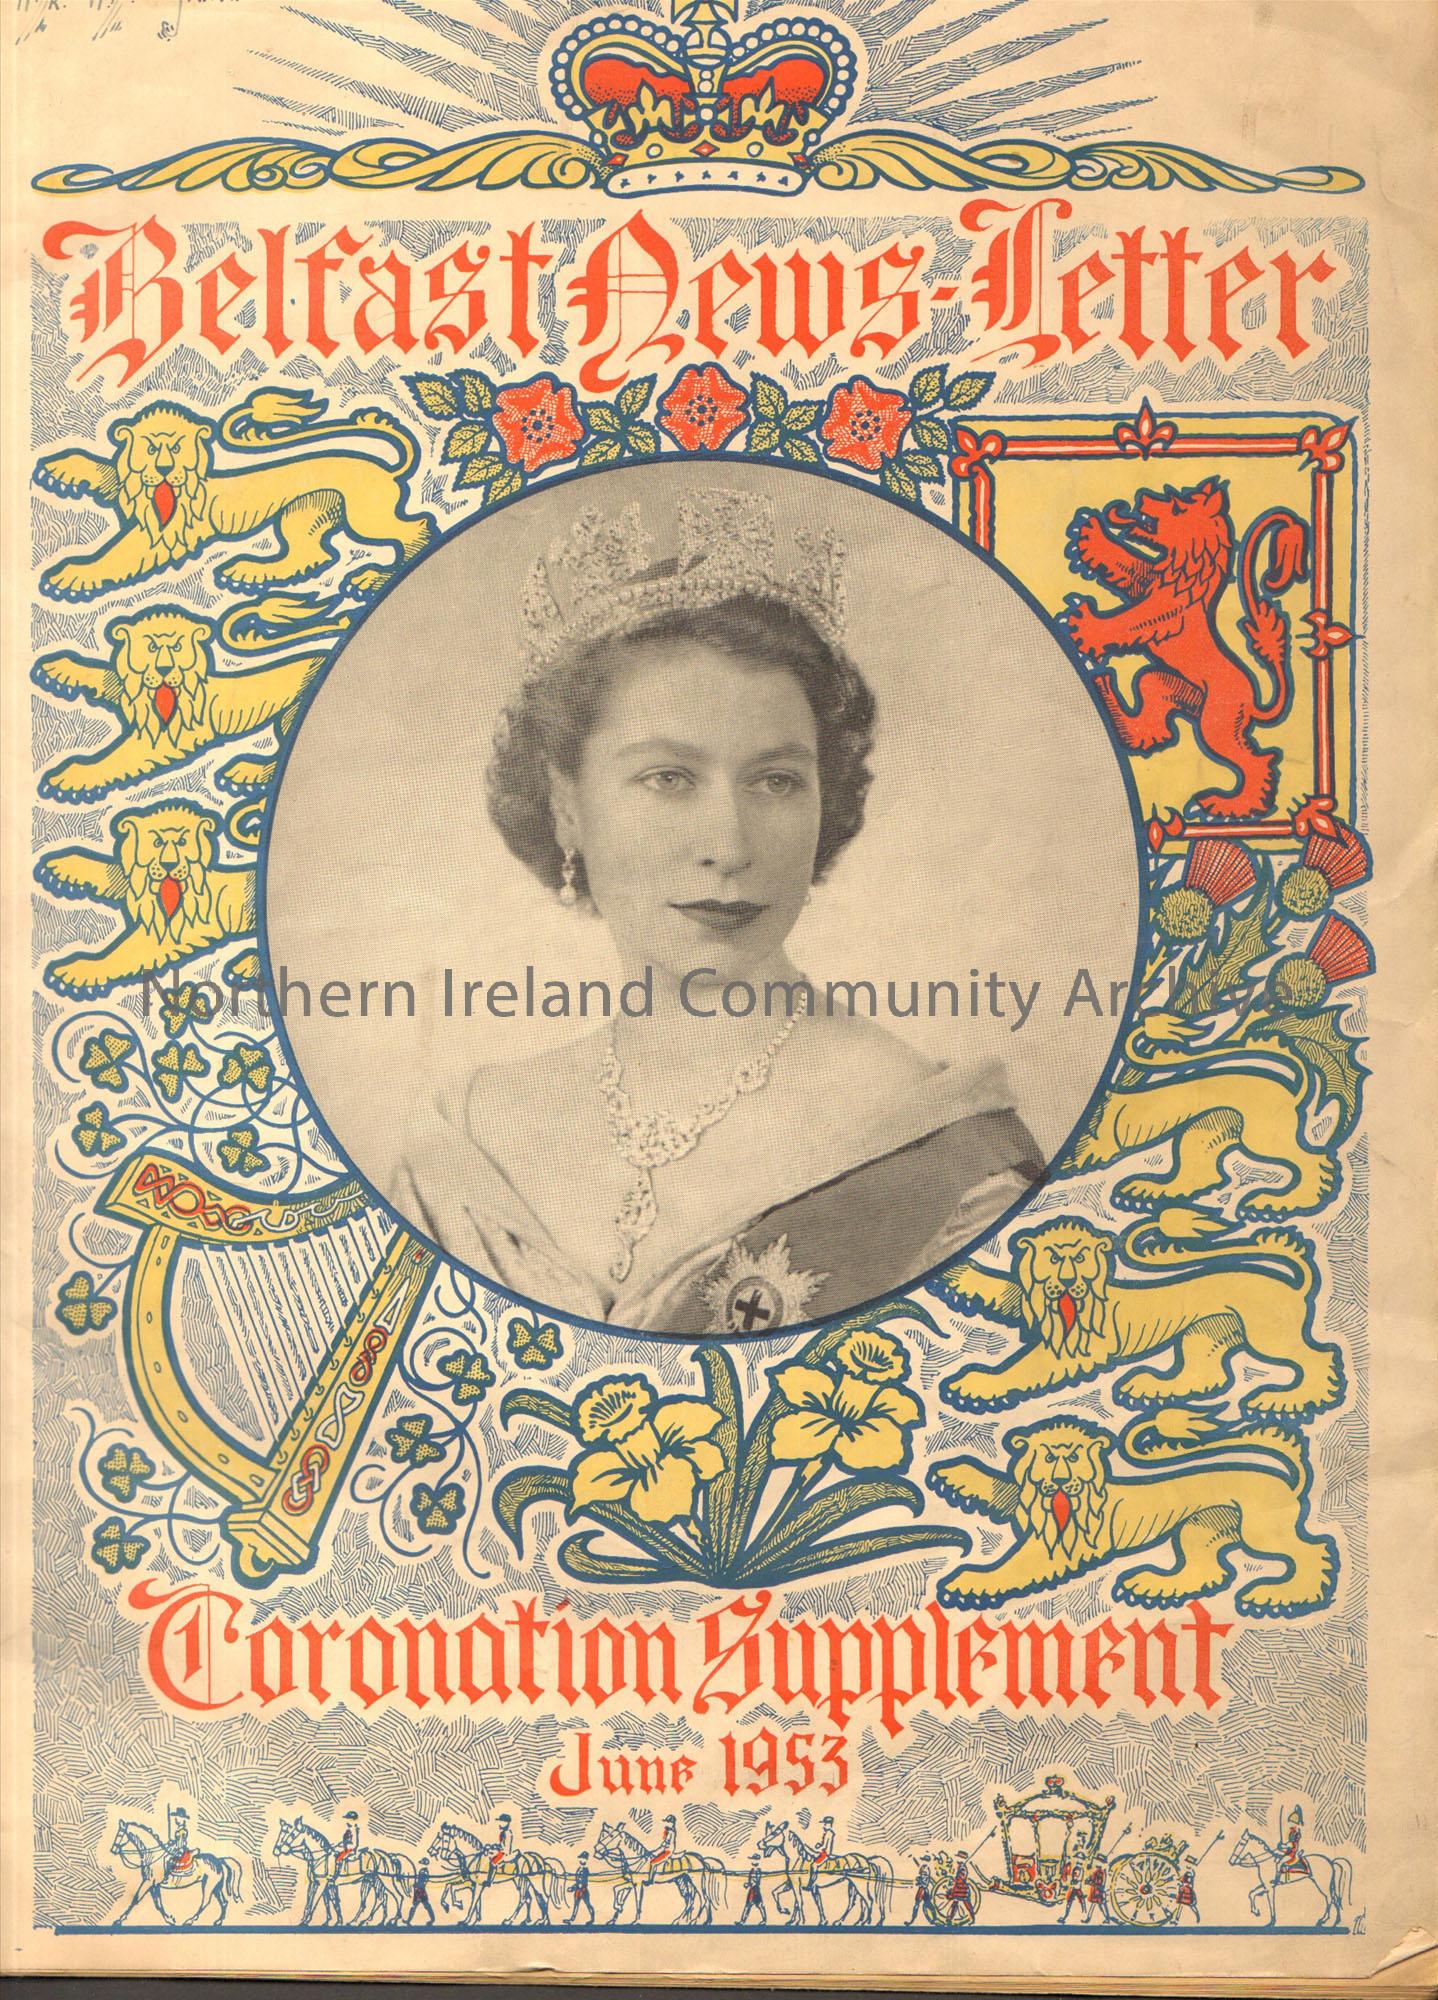 Belfast Newsletter Coronation Supplement June 1953. Cover has black and white image of Queen Elizabeth II surround by a design containing the three li…